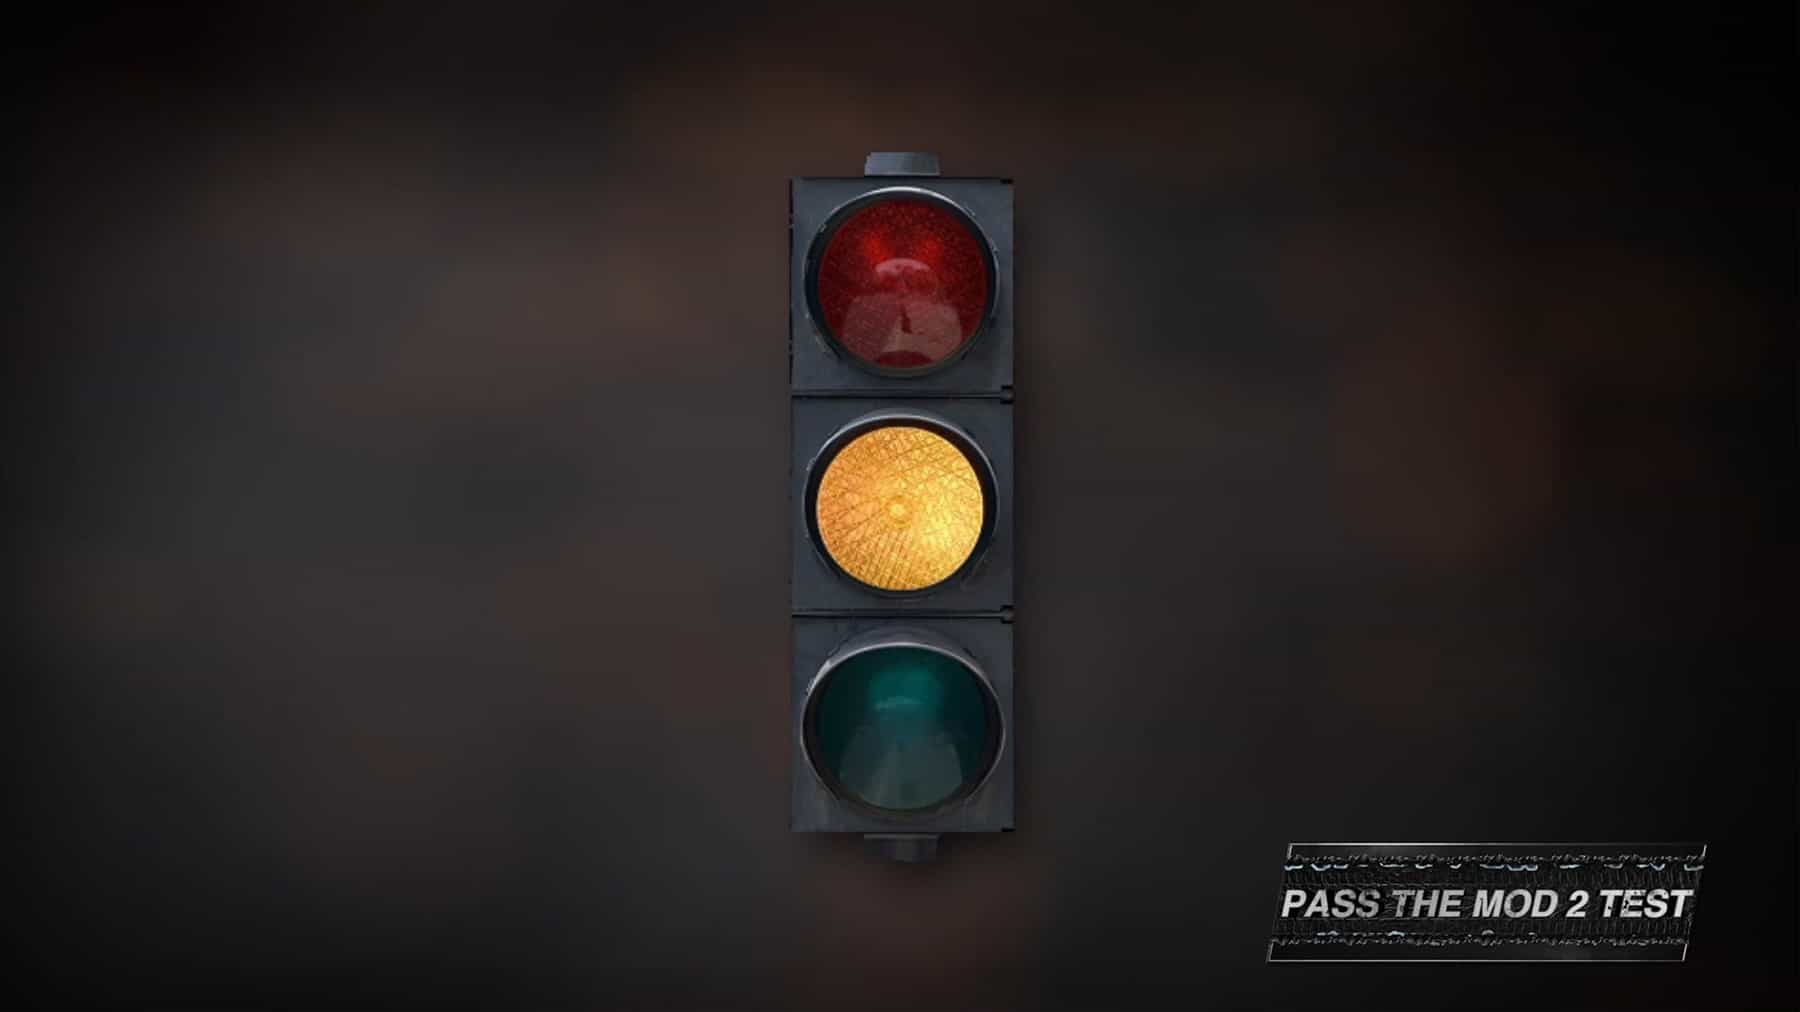 DIFFERENT TYPES OF TRAFFIC LIGHTS